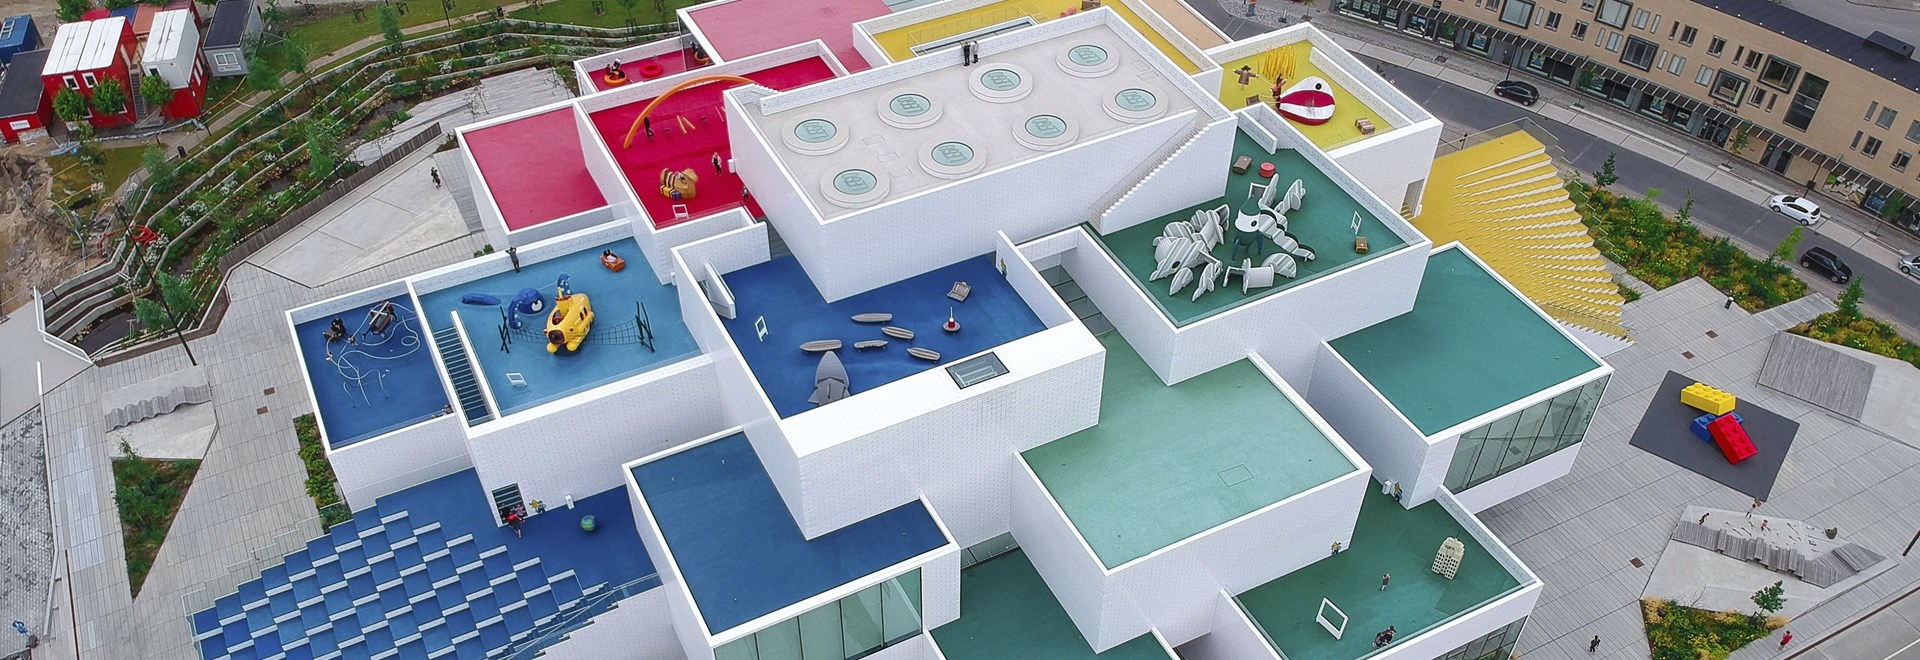 LEGO House - terms and conditions